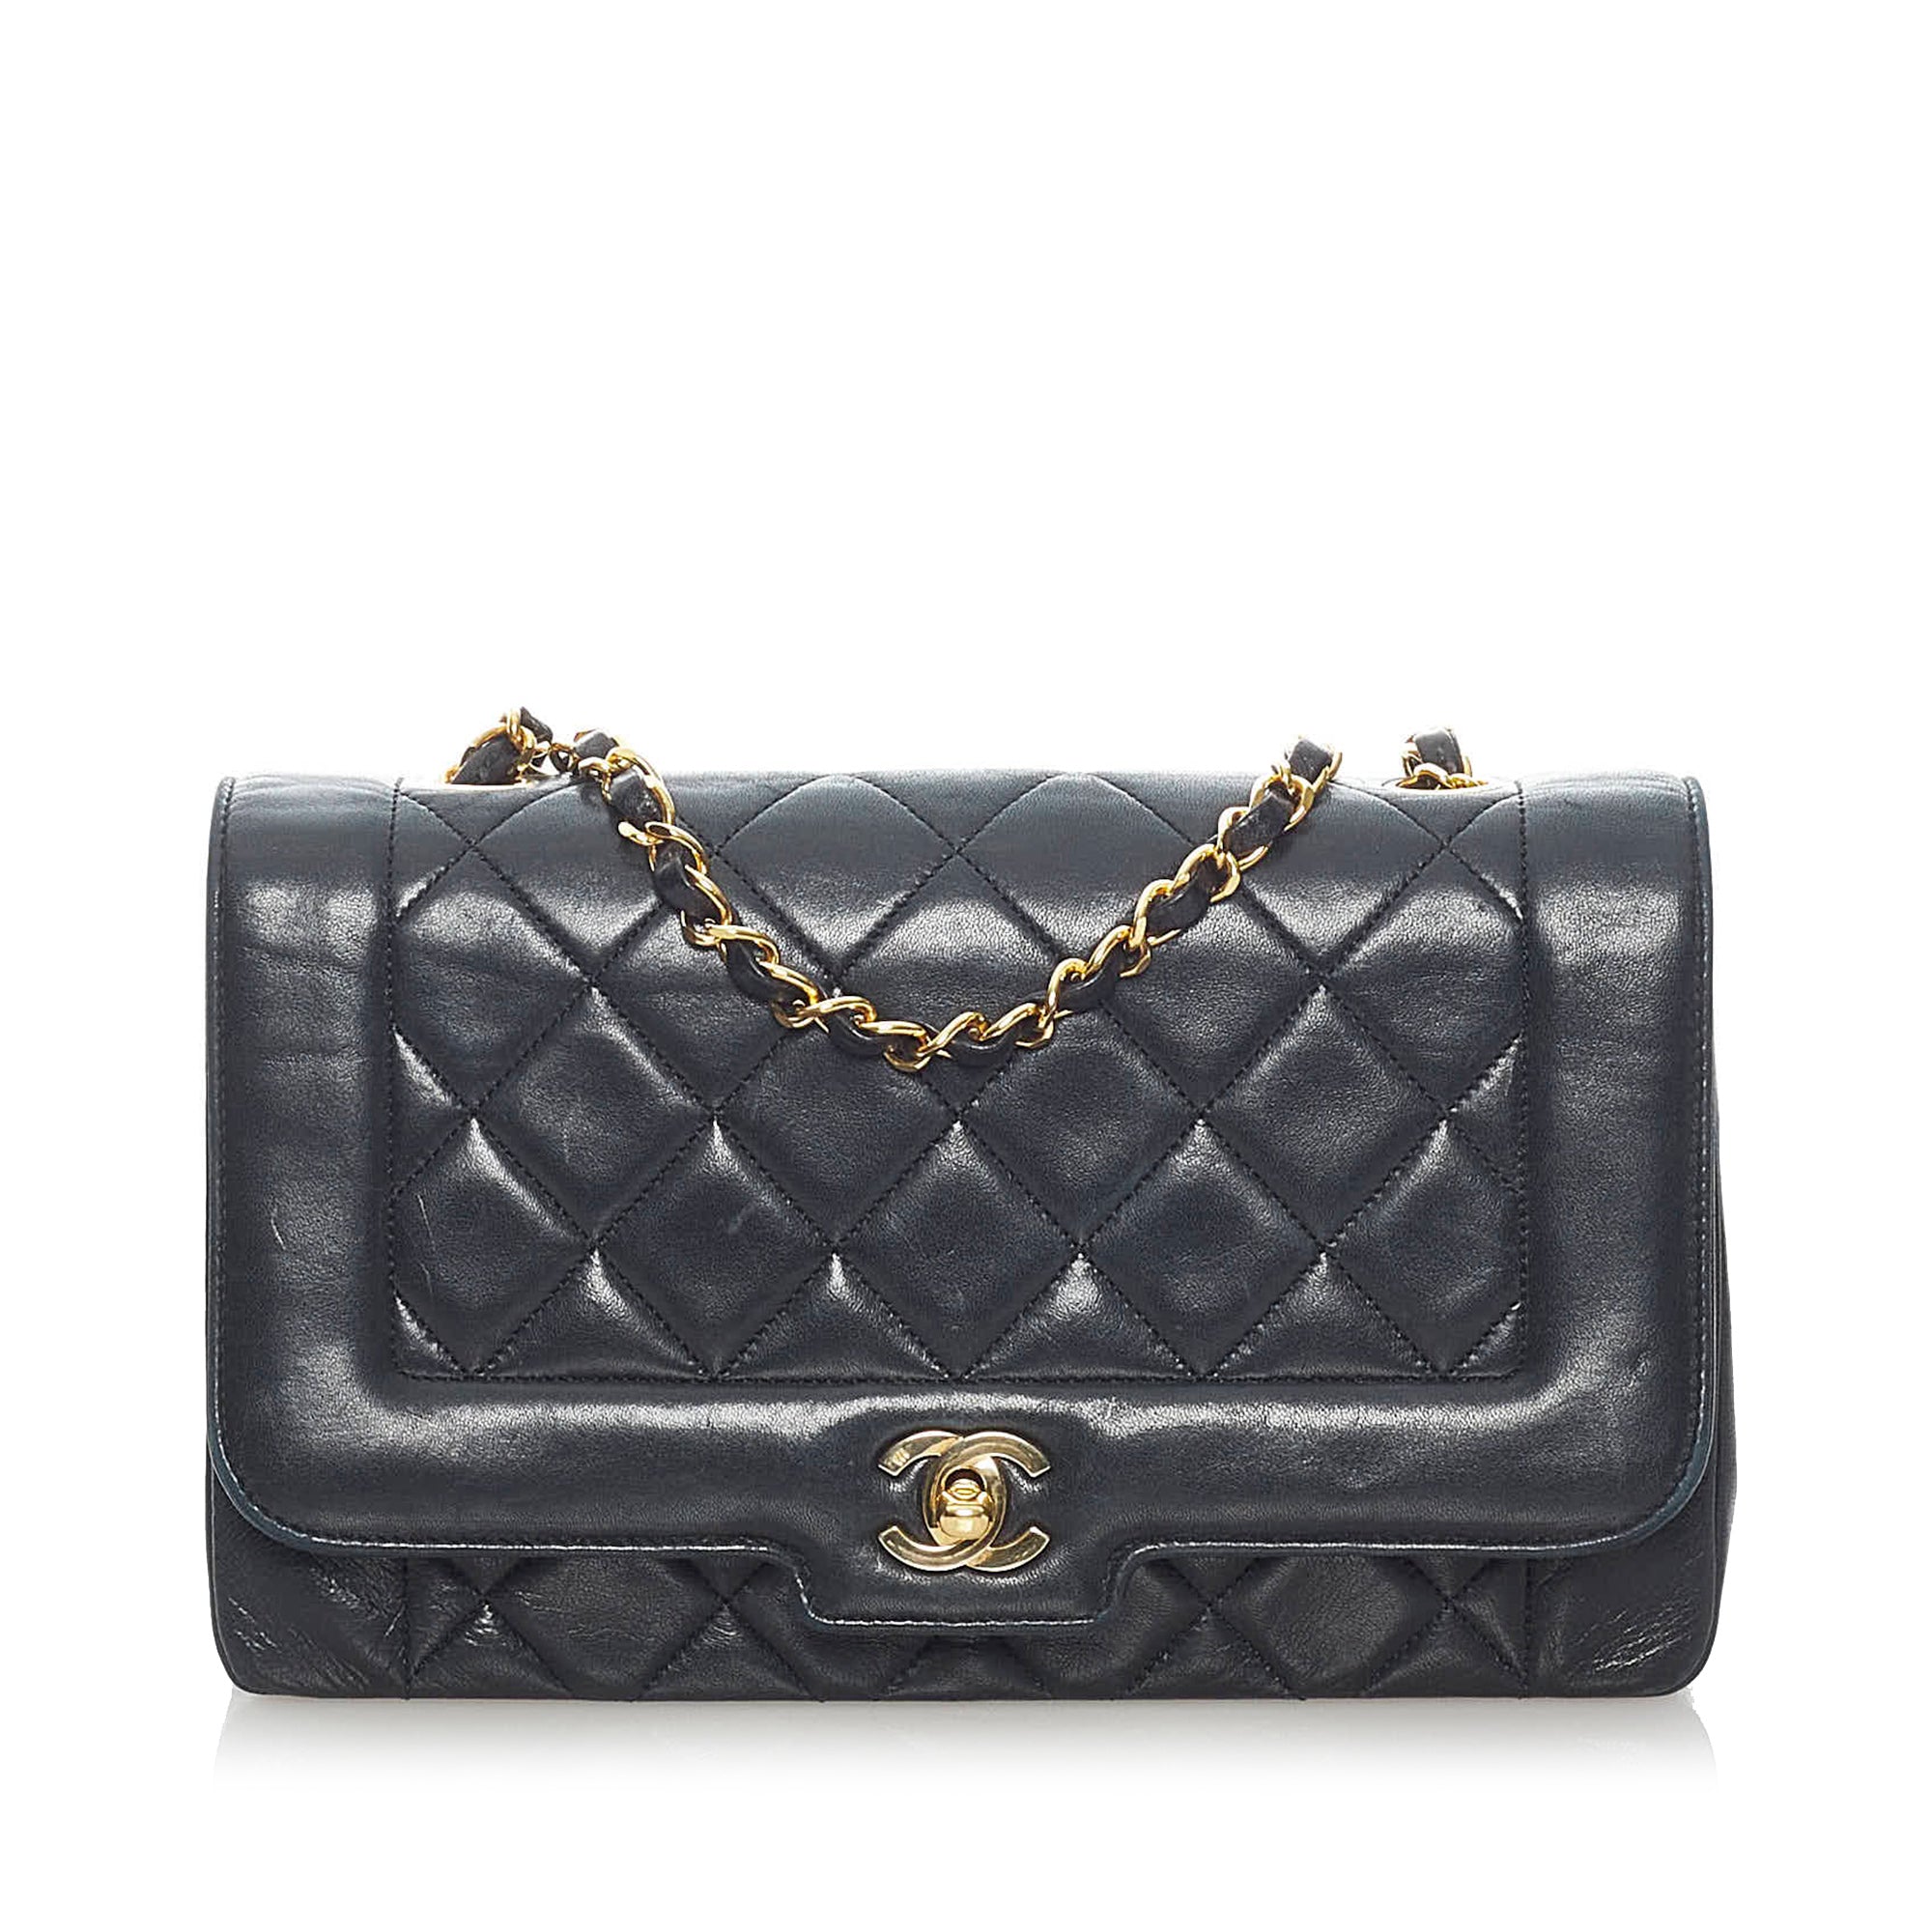 Chanel J224 Chanel 9 Diana Classic Black Quilted Leather Shoulder